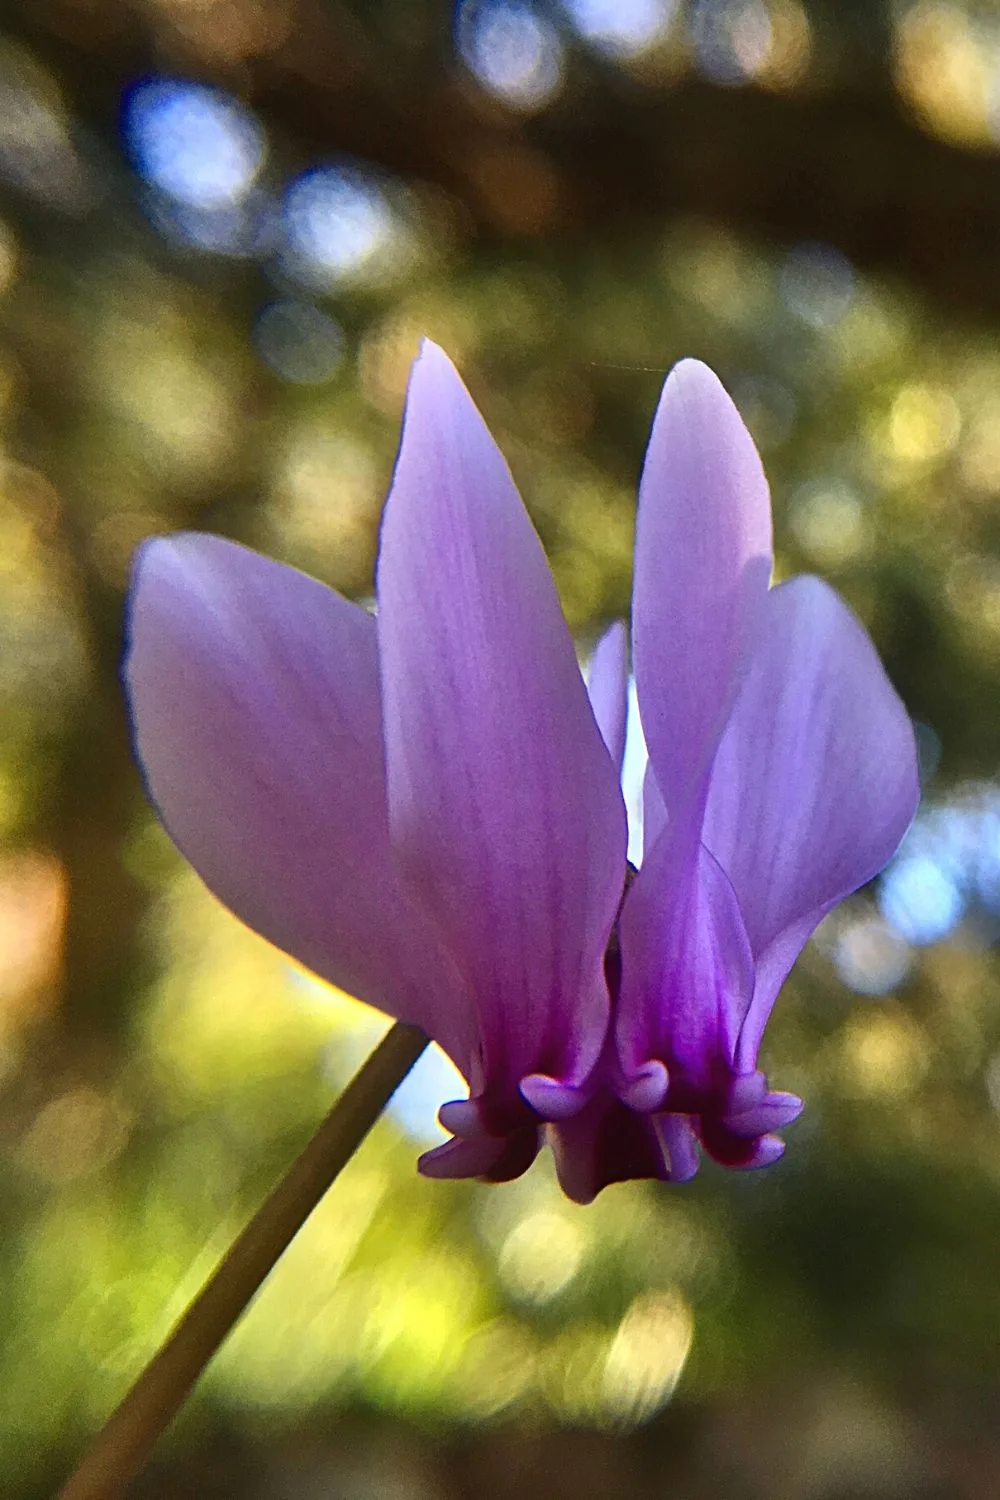 If you want a miniature, sweet-smelling plant to grow on the east-facing side of the house, then plant Florist’s Cyclamen